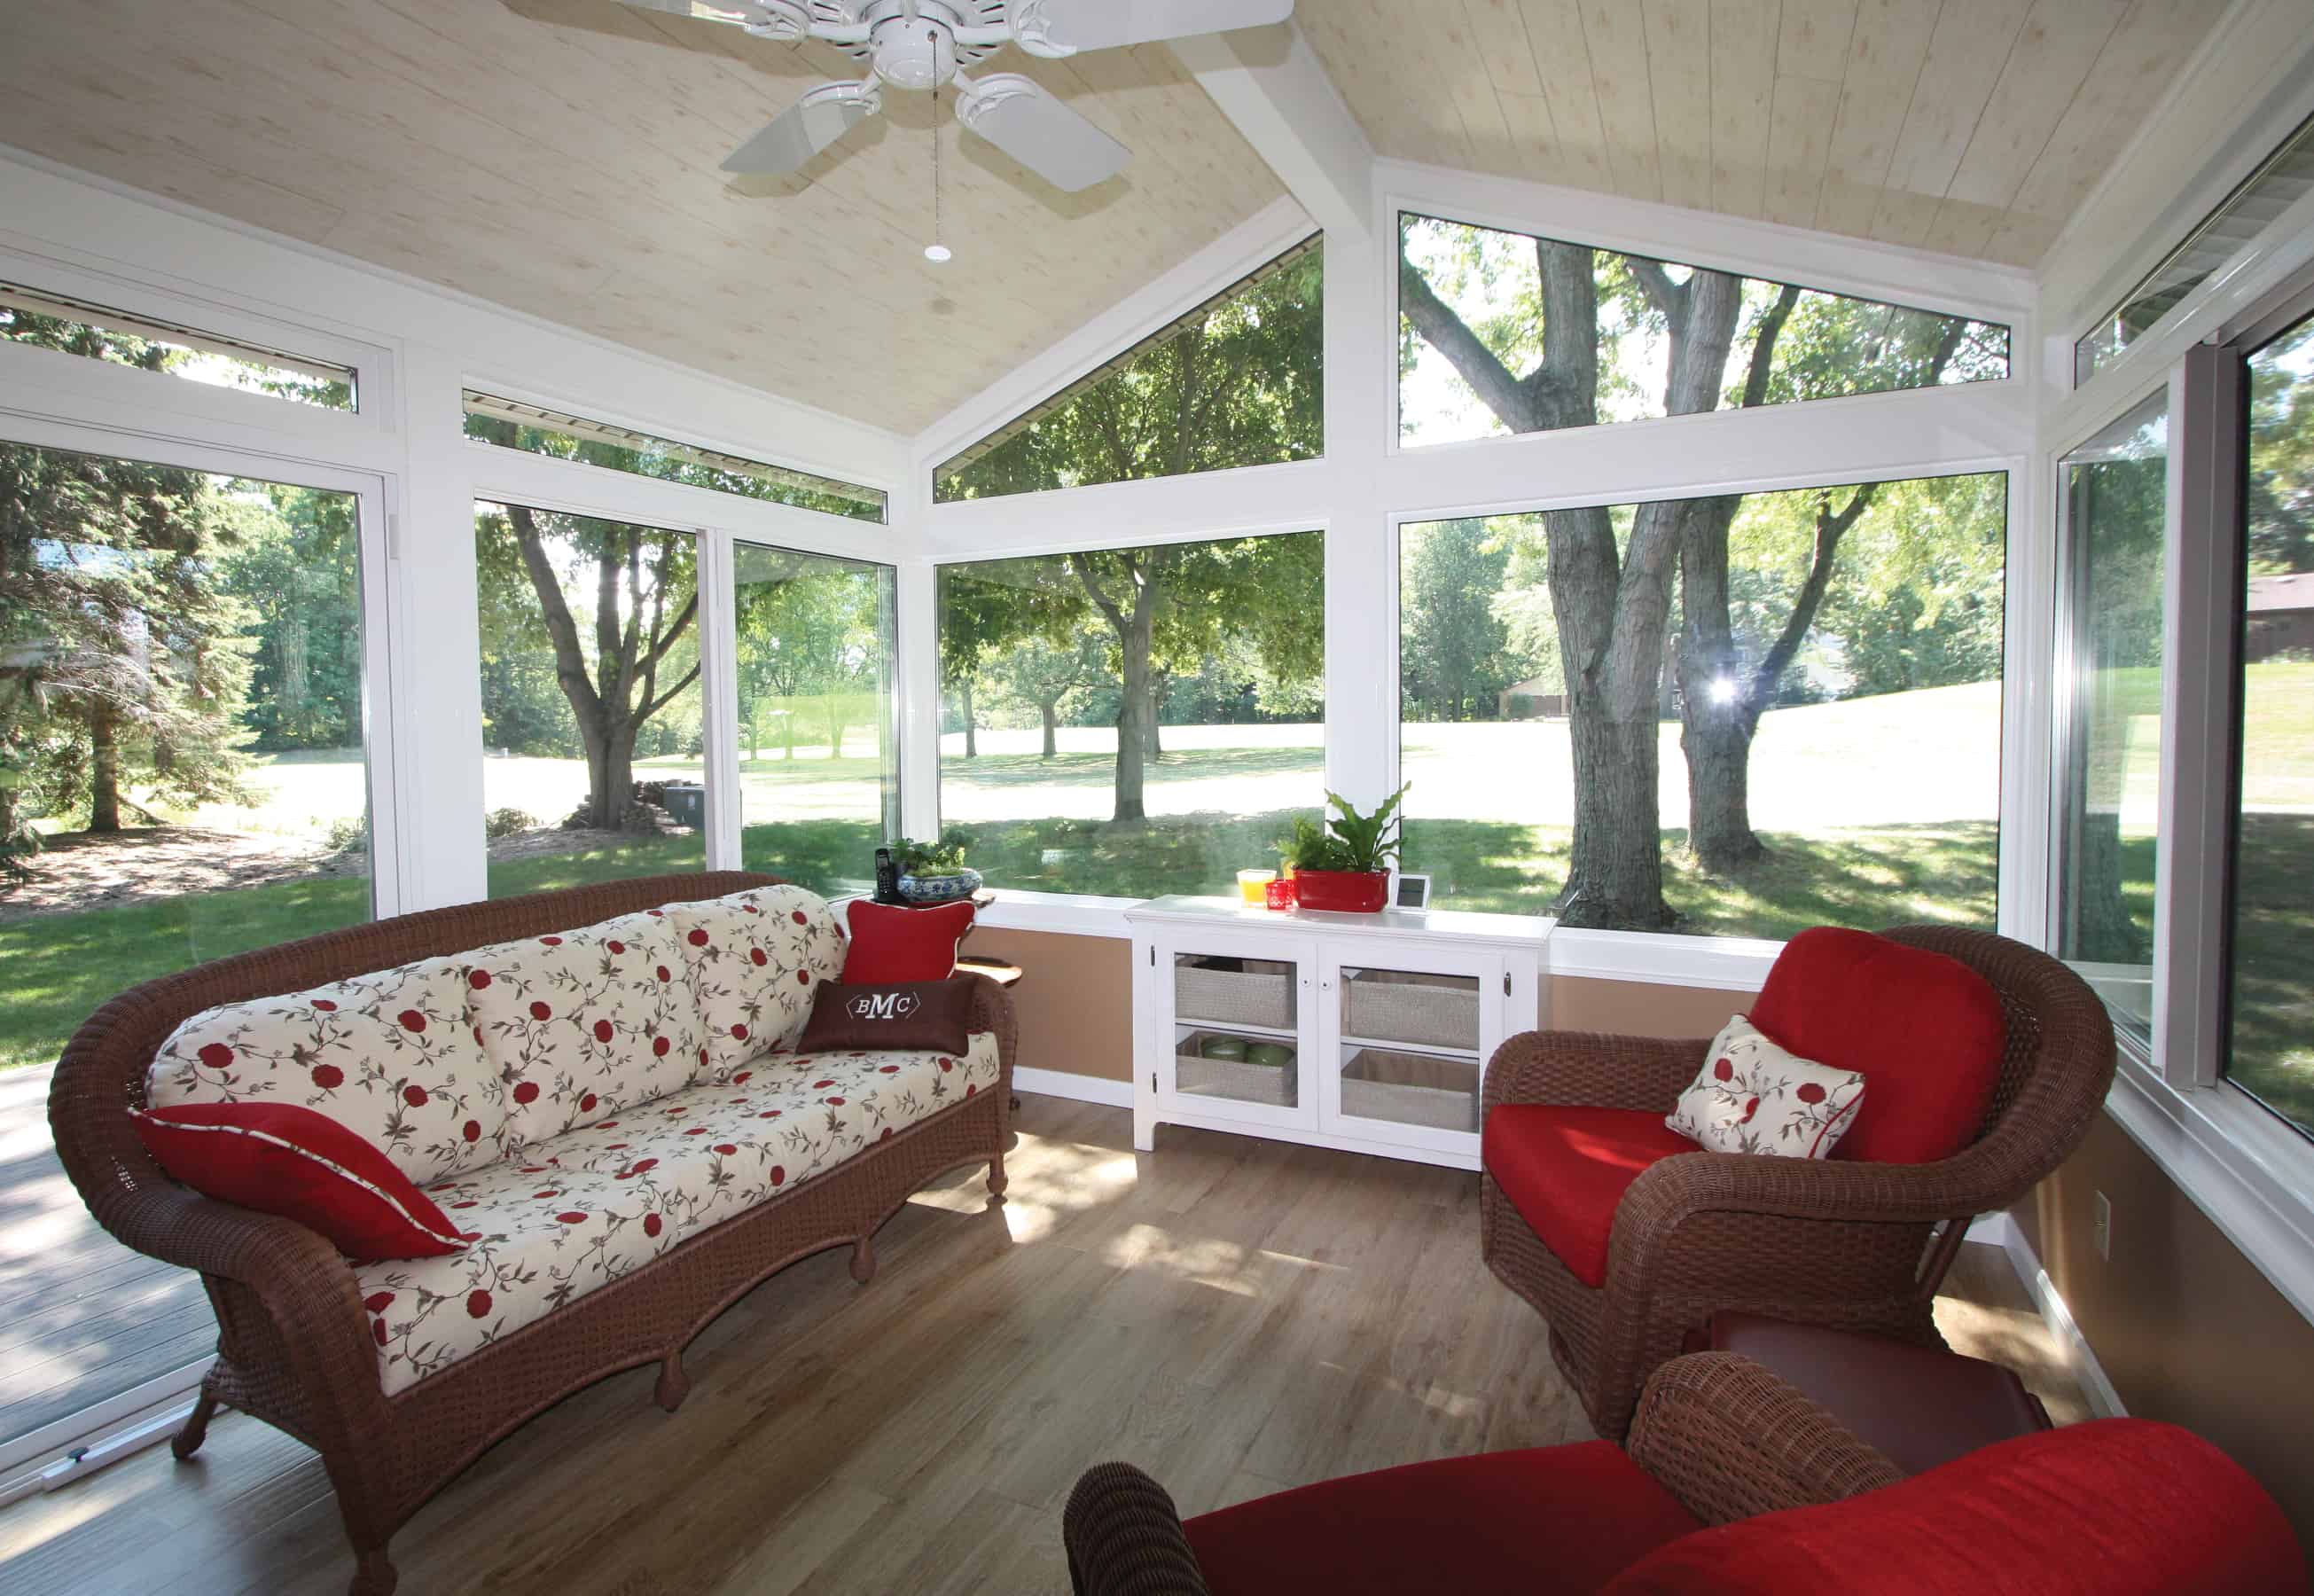 Tips and Tricks for Redecorating Your Sunroom